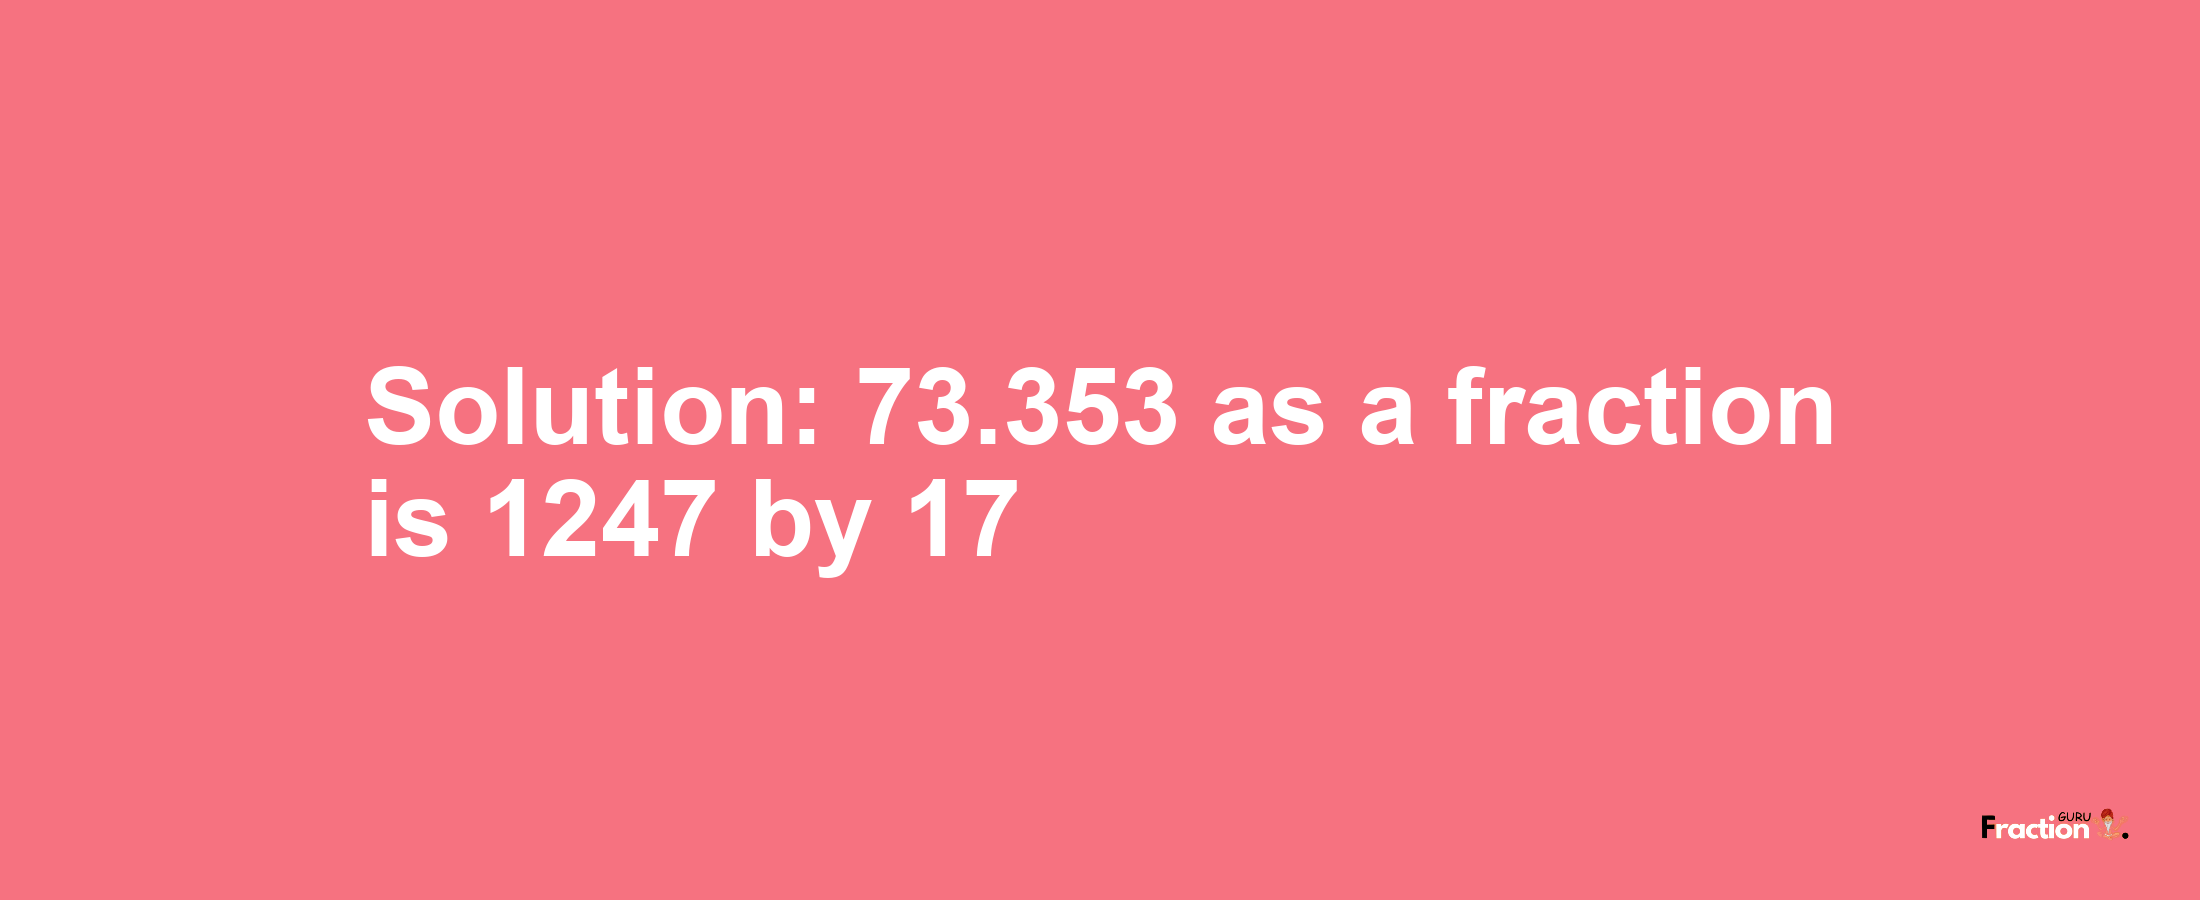 Solution:73.353 as a fraction is 1247/17